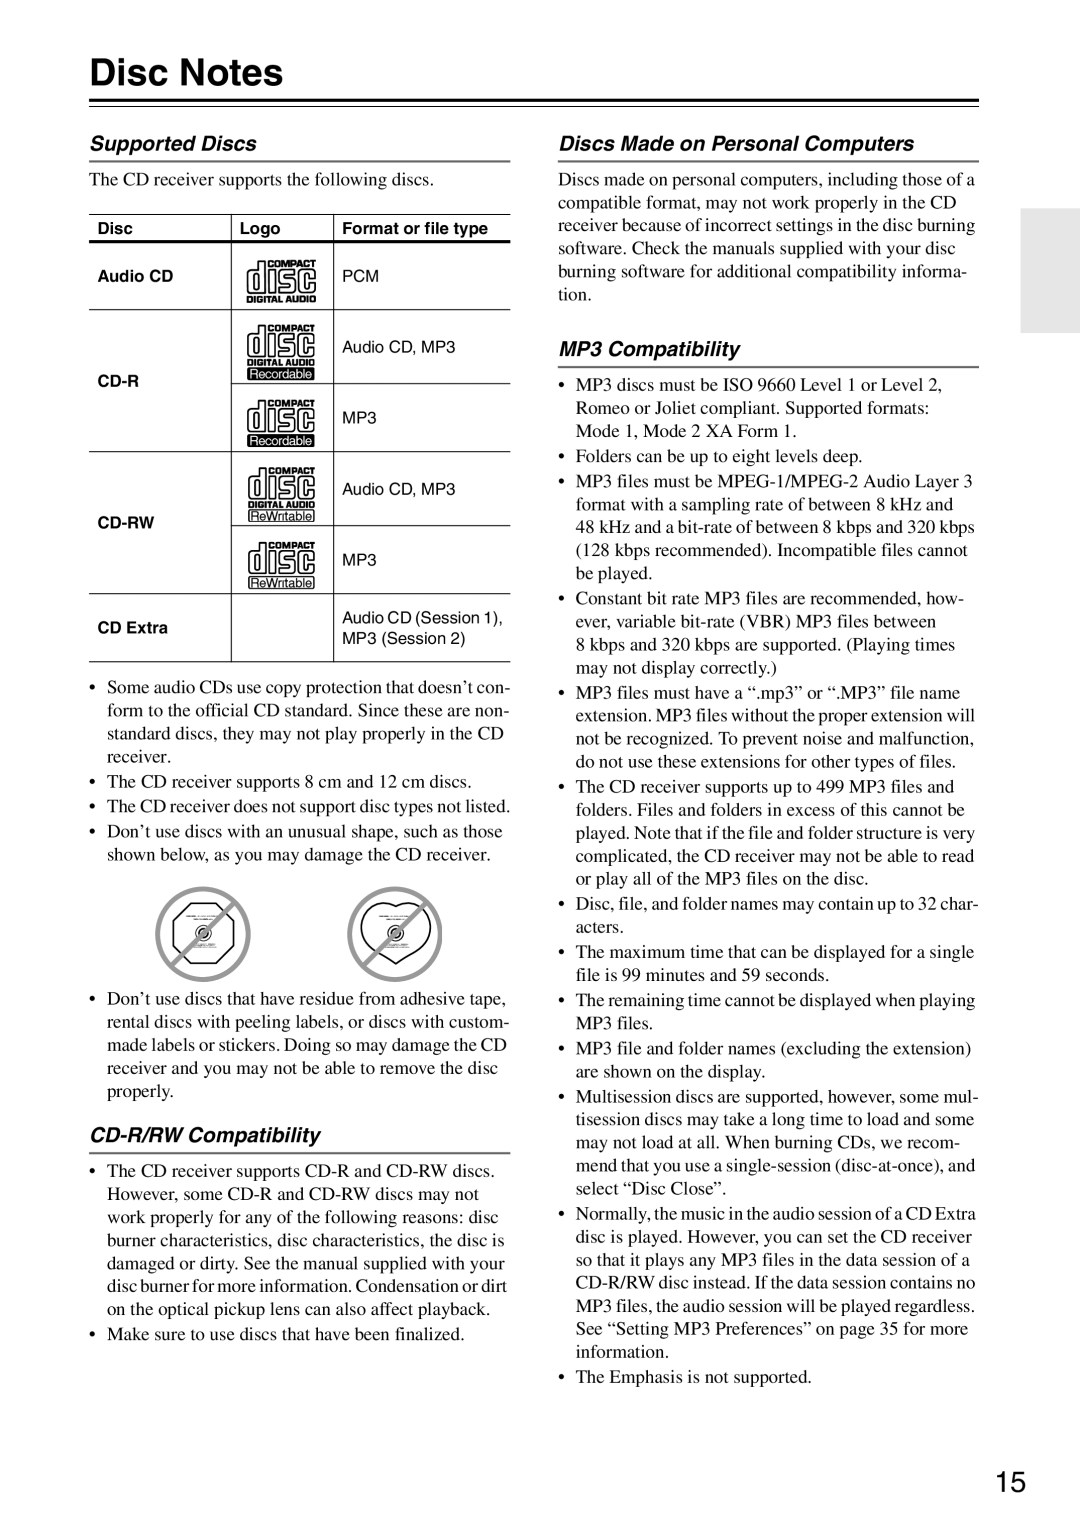 Onkyo CR-525 Disc Notes, Supported Discs, CD-R/RWCompatibility, Discs Made on Personal Computers, MP3 Compatibility 